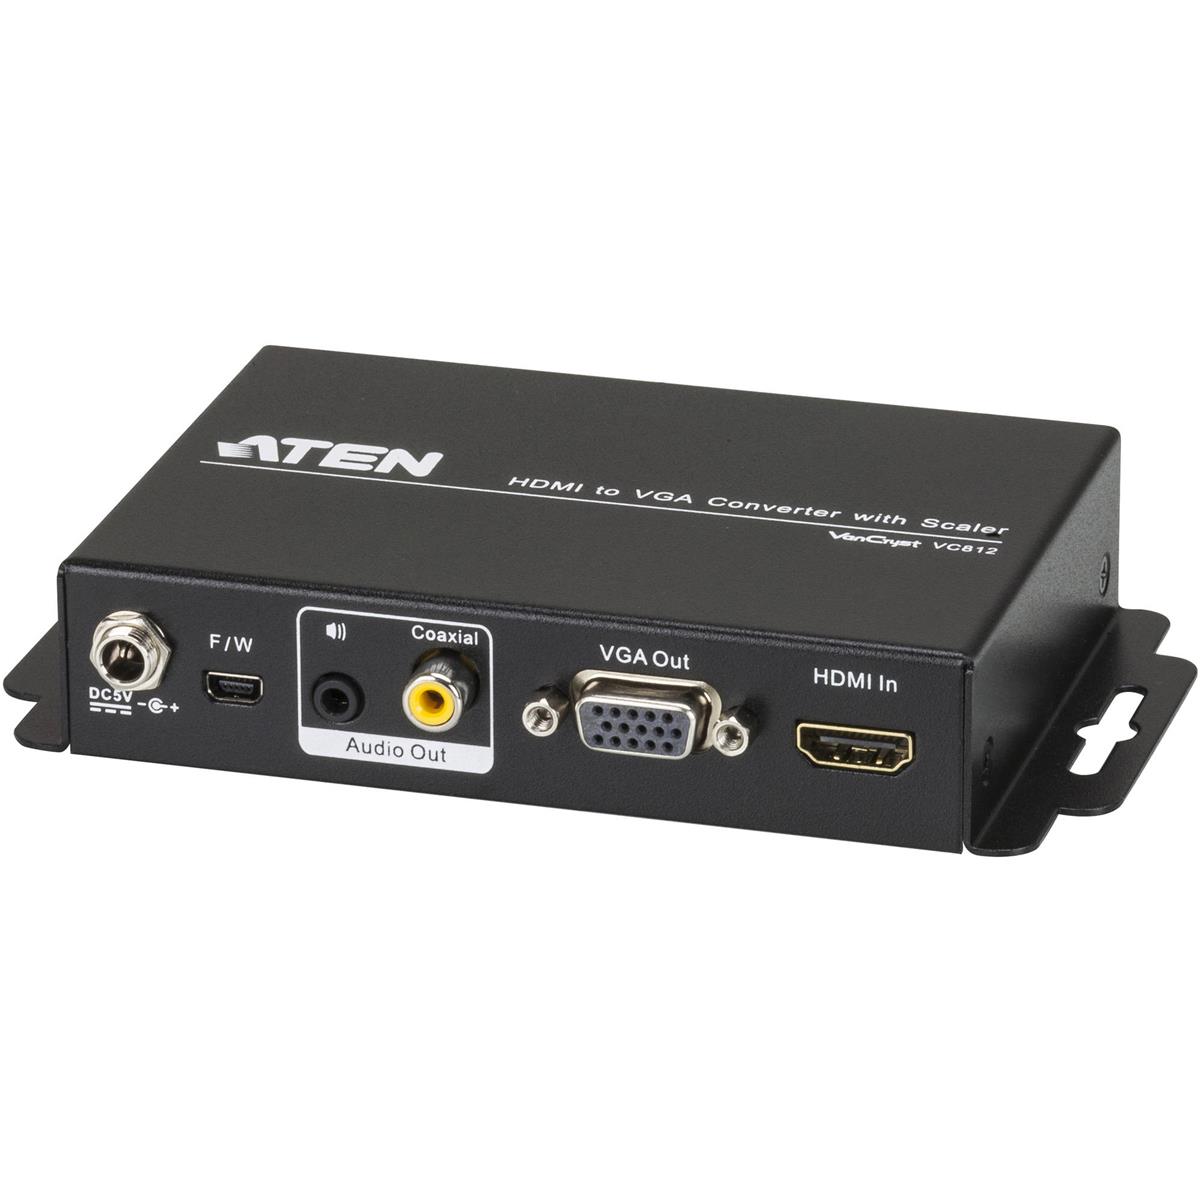 Image of Aten VC812 HDMI to VGA Converter with Scaler